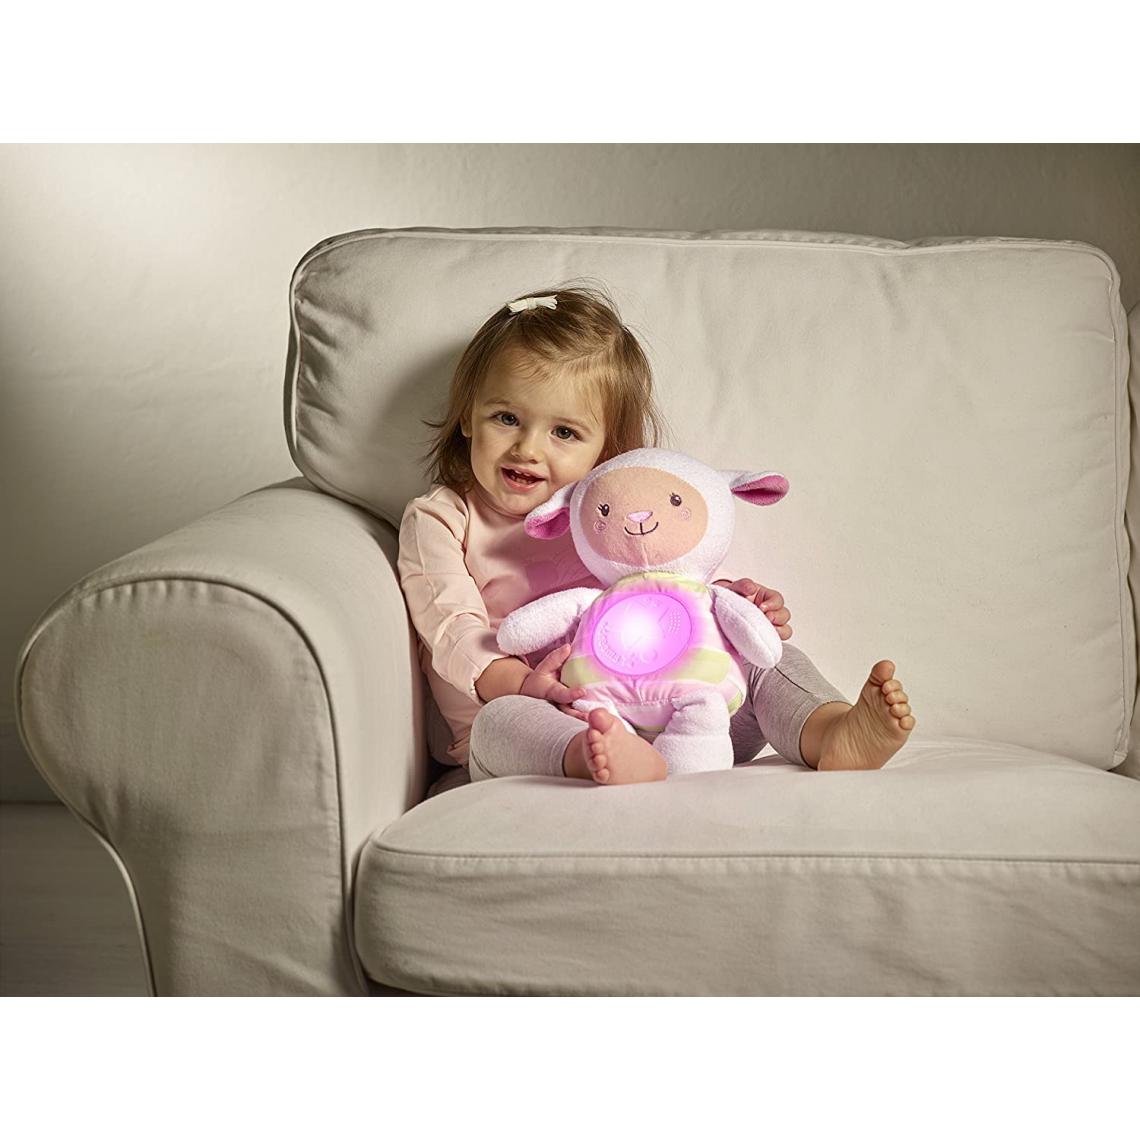 Chicco - peluche douce musicale et lumineuse Mouton rose - Peluches interactives